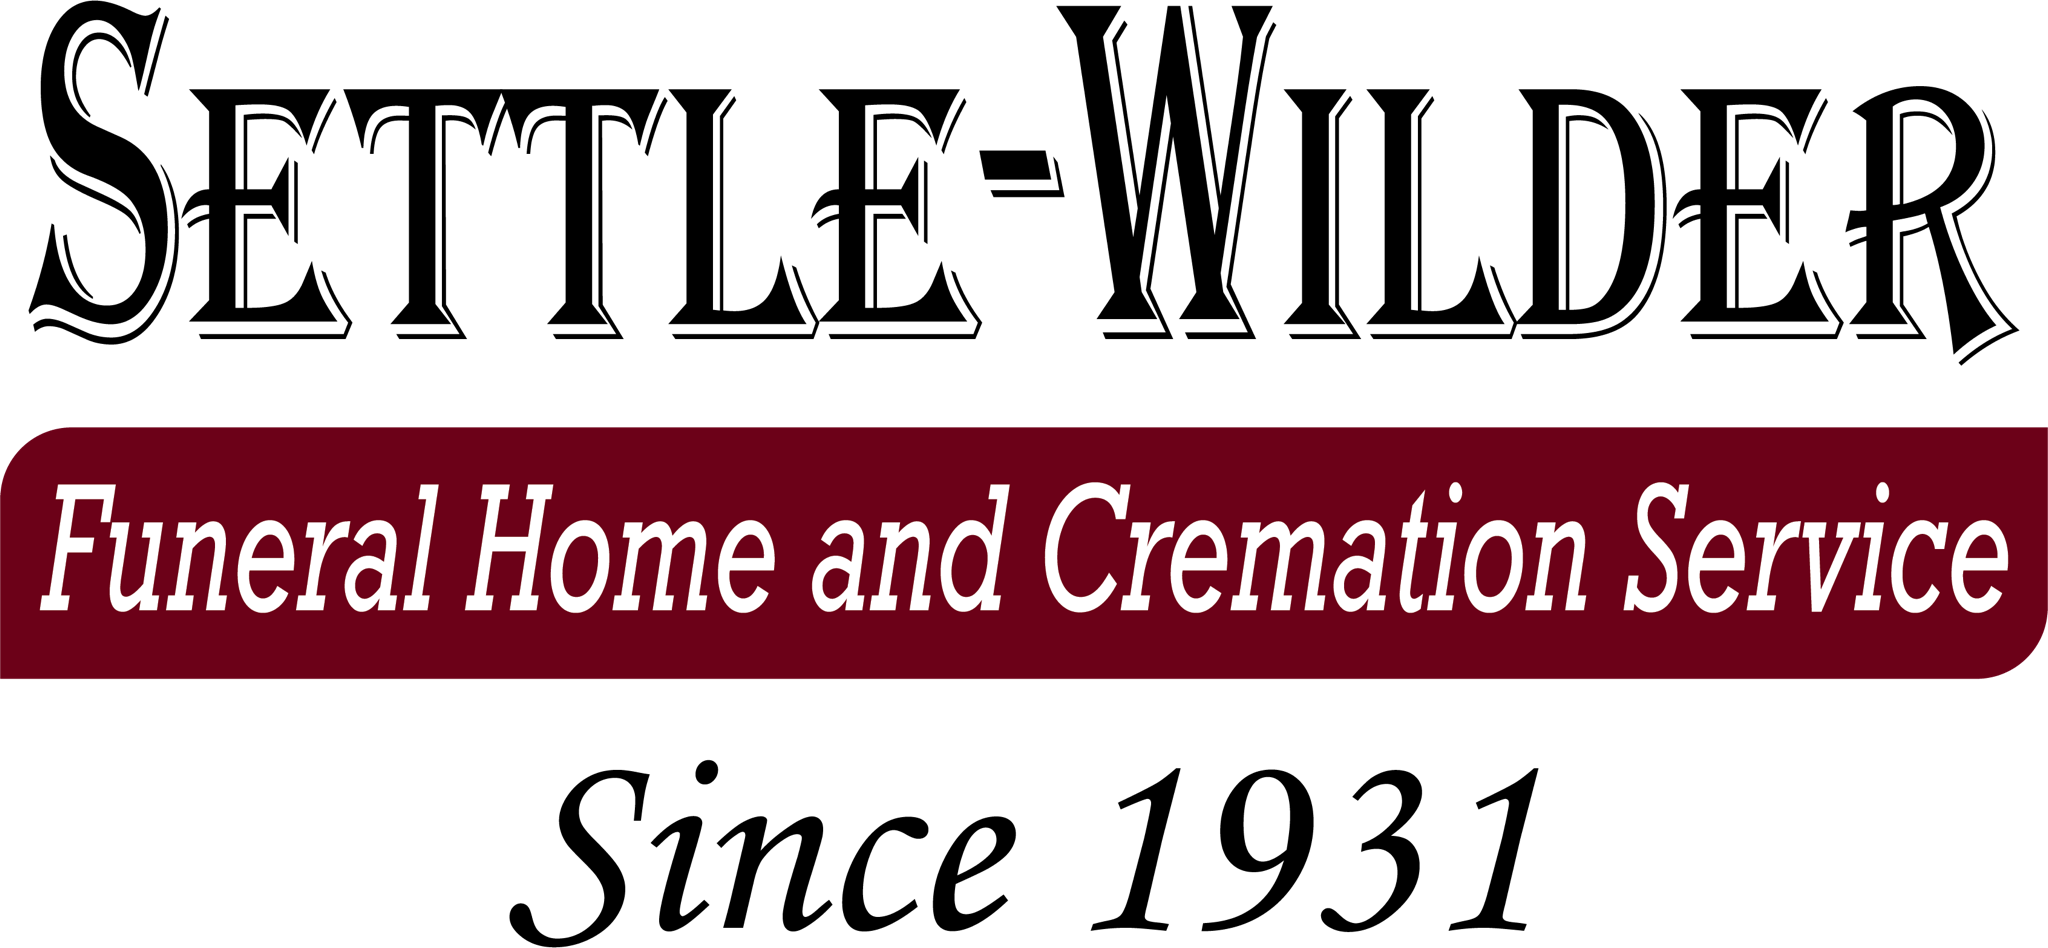 Settle-Wilder Funeral Home and Cremation Services